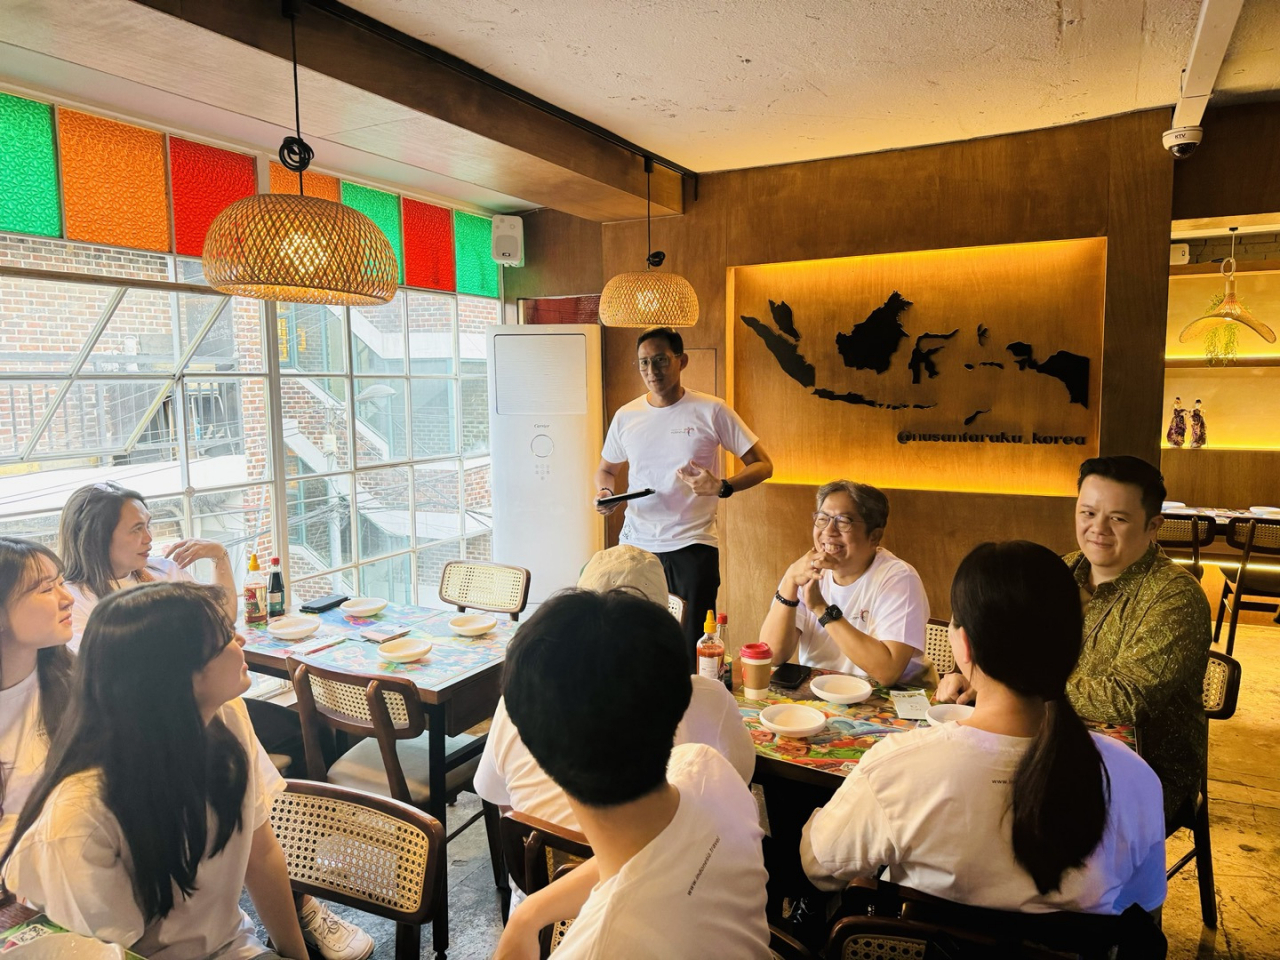 Indonesia’s Minister for Tourism and Creative Economy Sandiaga Uno interacts with Korean students during his visit to Seoul at an Indonesian Restaurant in Mapo-gu, Seoul on May 10. (Sanjay Kumar/ The Korea Herald)